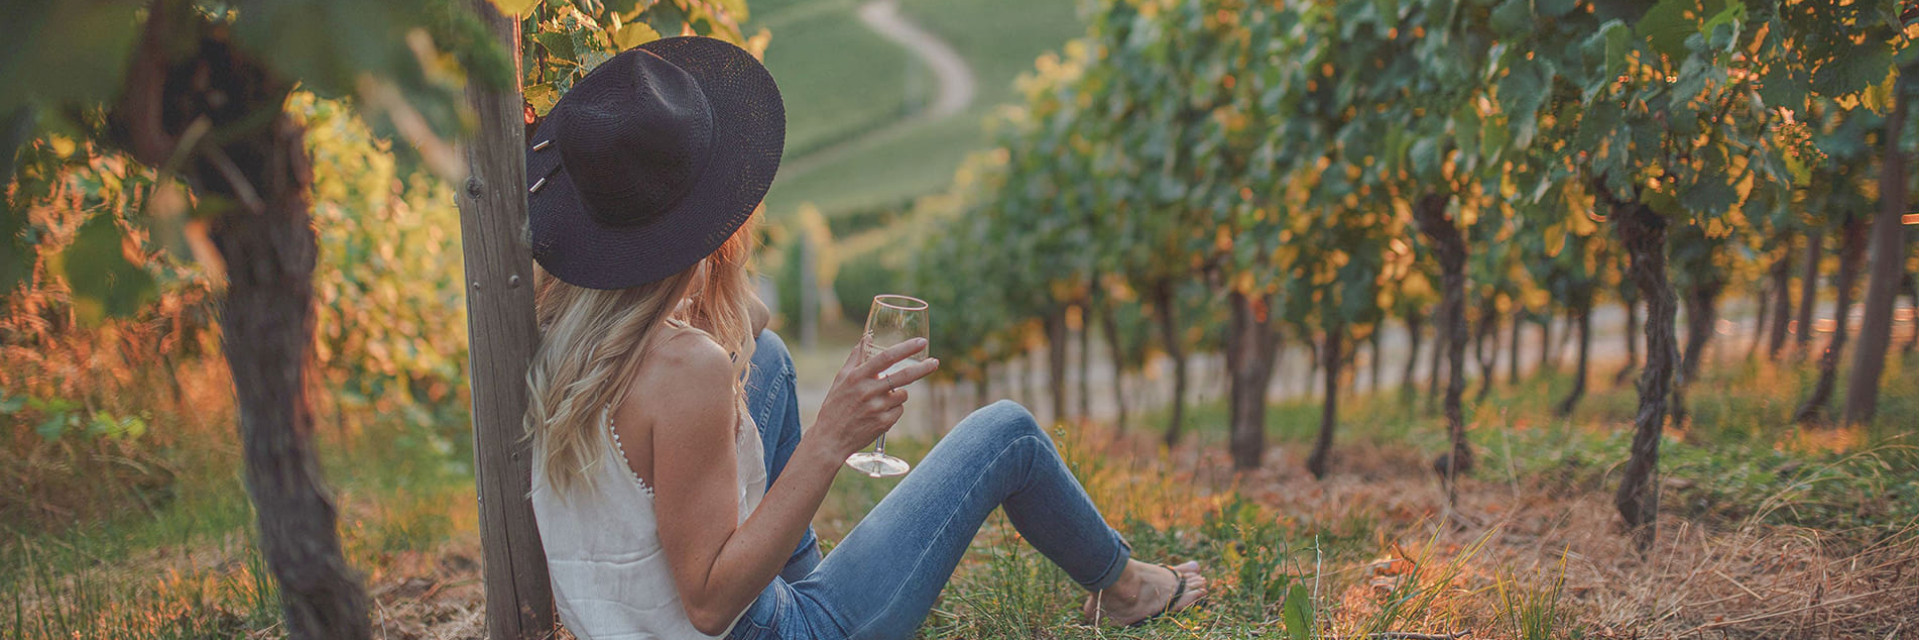 Photo of a woman enjoying a glass of white wine at sunset over the vines.